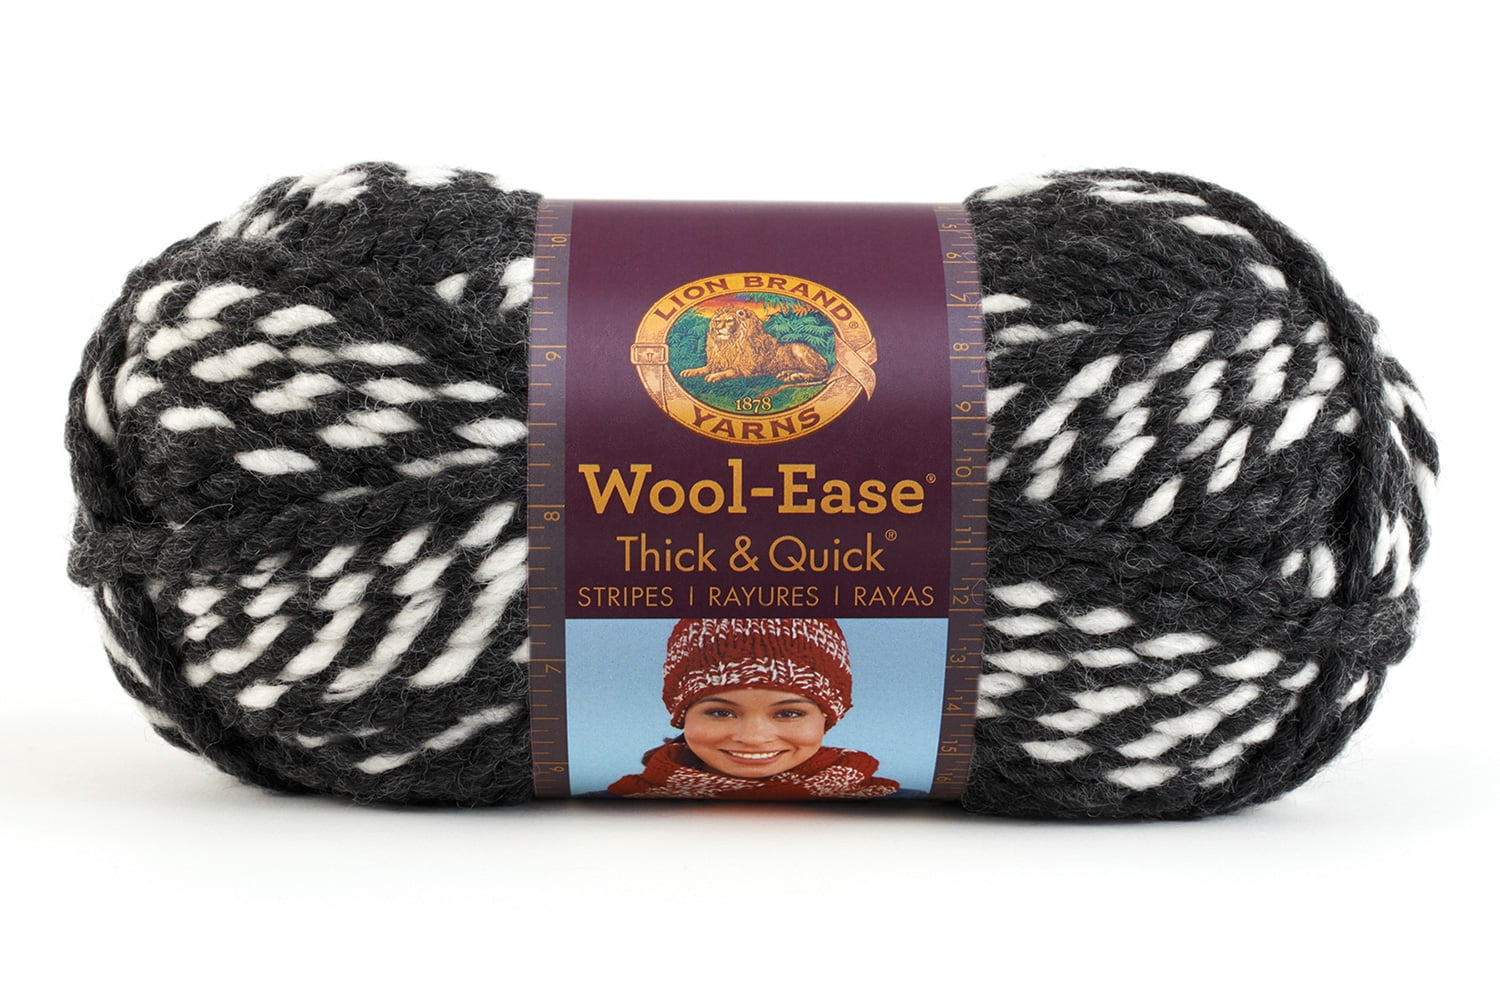 Lion Brand Wool-Ease Thick & Quick Yarn-Seaglass, 1 count - Harris Teeter